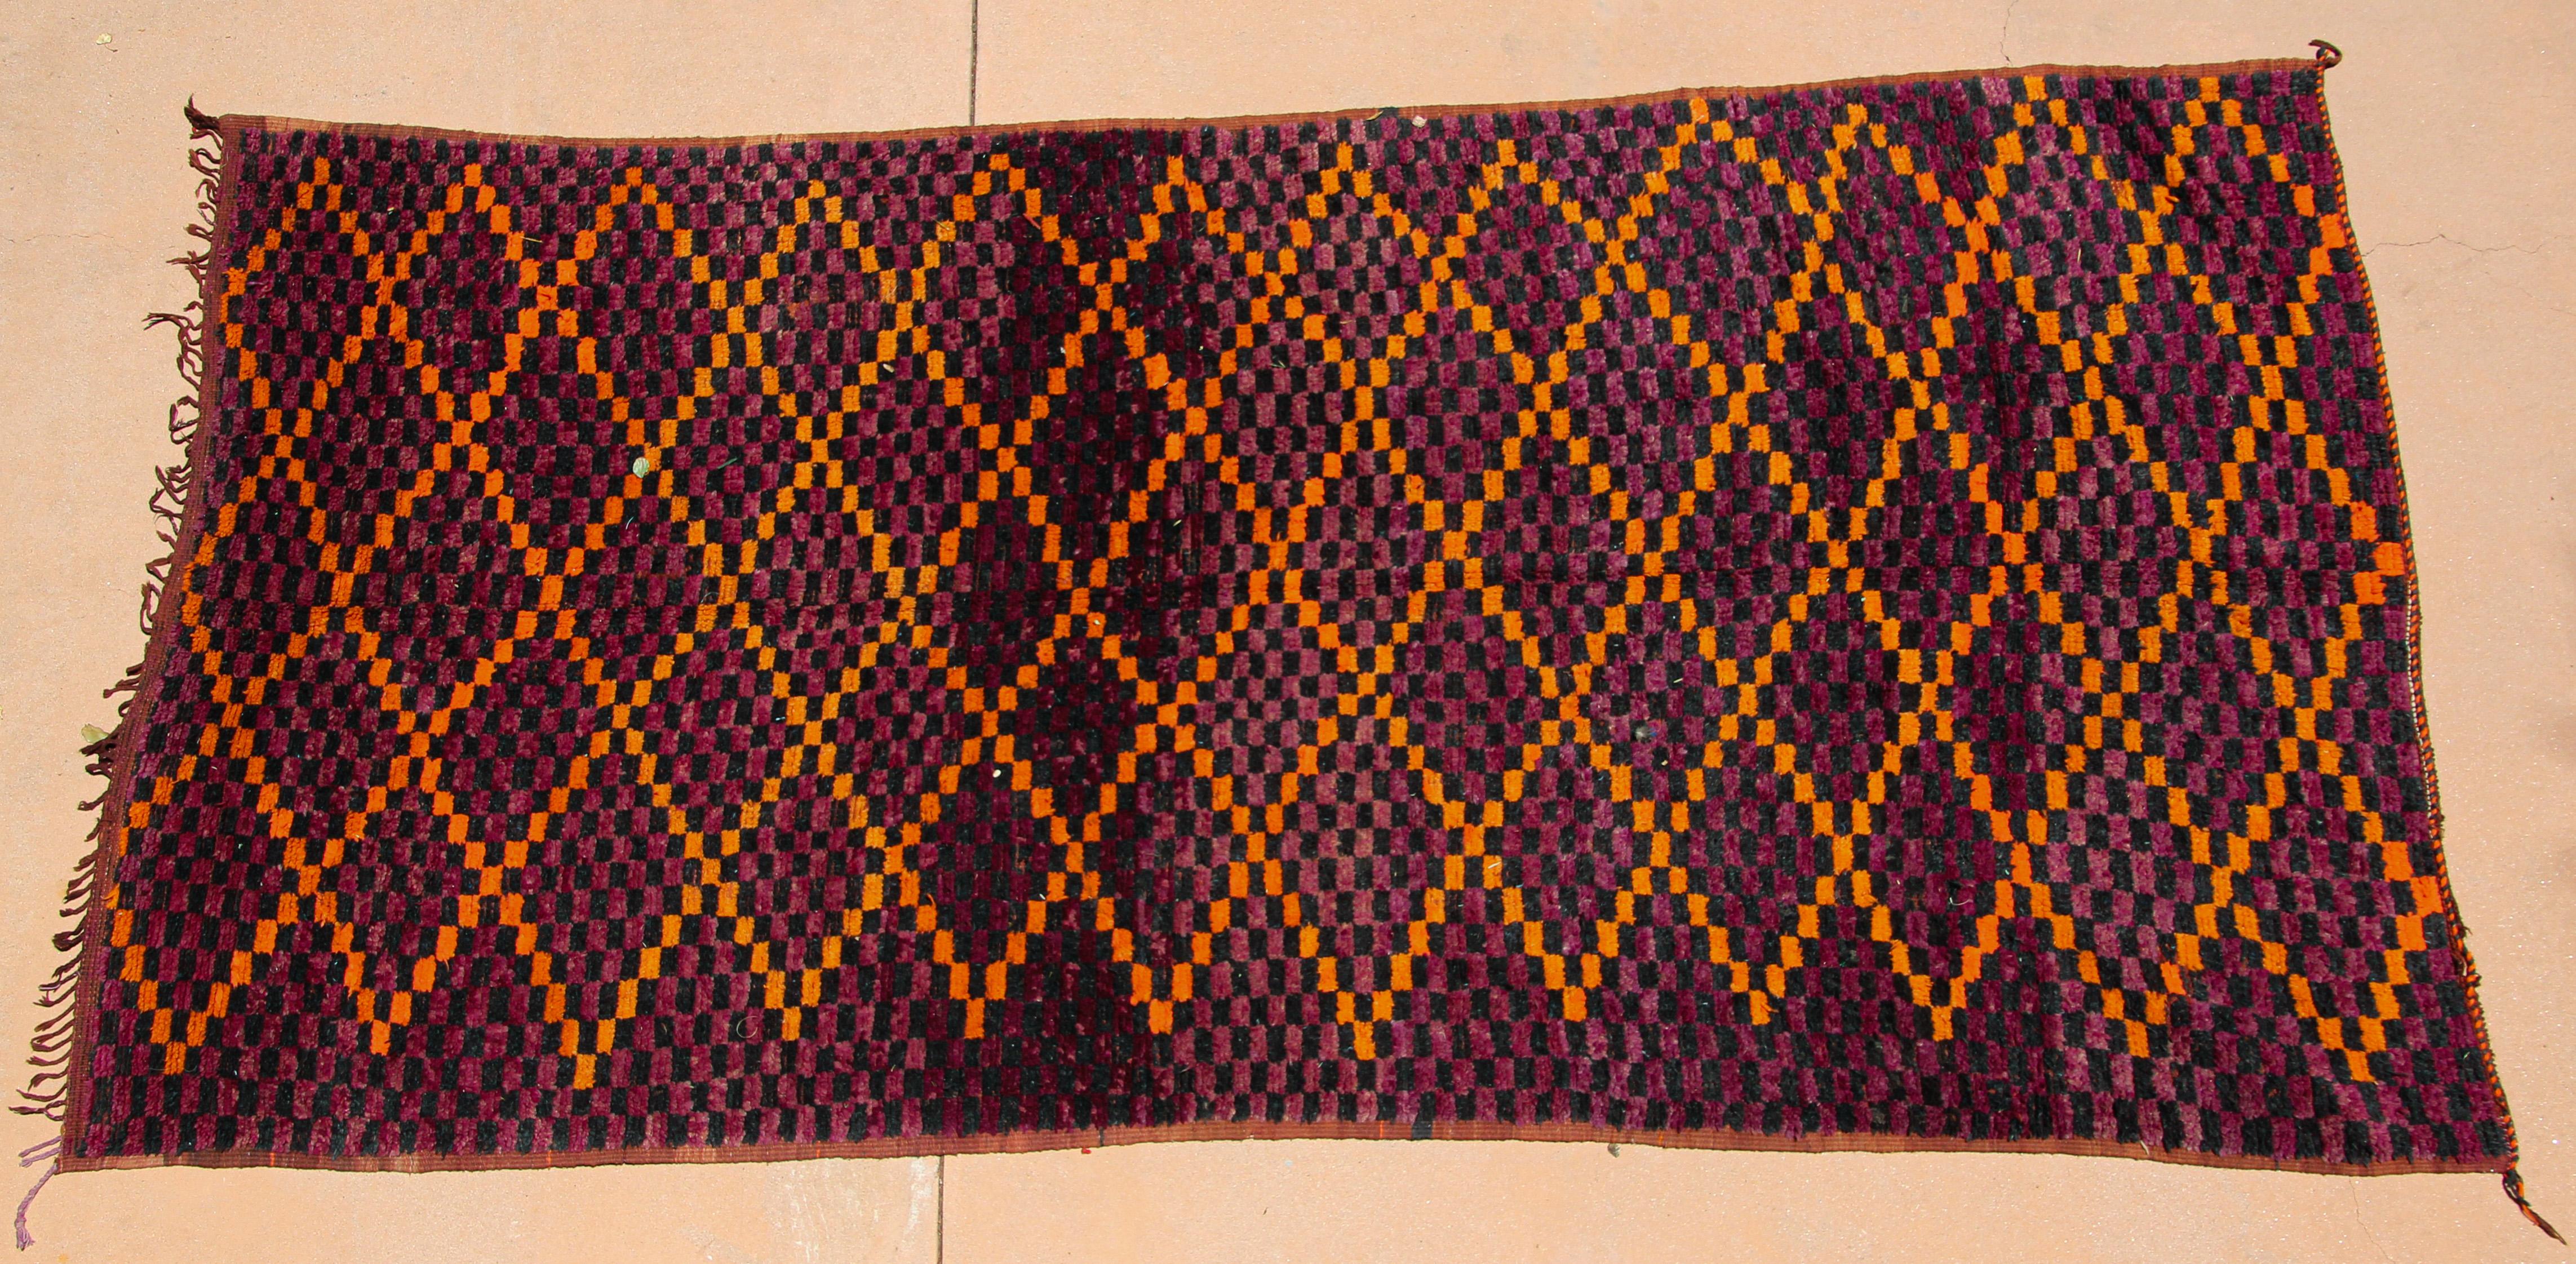 1960s authentic Large vintage Moroccan rug, hand-woven. Wonderf work of Art, purples hues geometrical losanges design. Great hand-woven vintage clector Moroccan runner.Great hand woven vintage lush Moroccan rug, purple, orange and black. Unique and